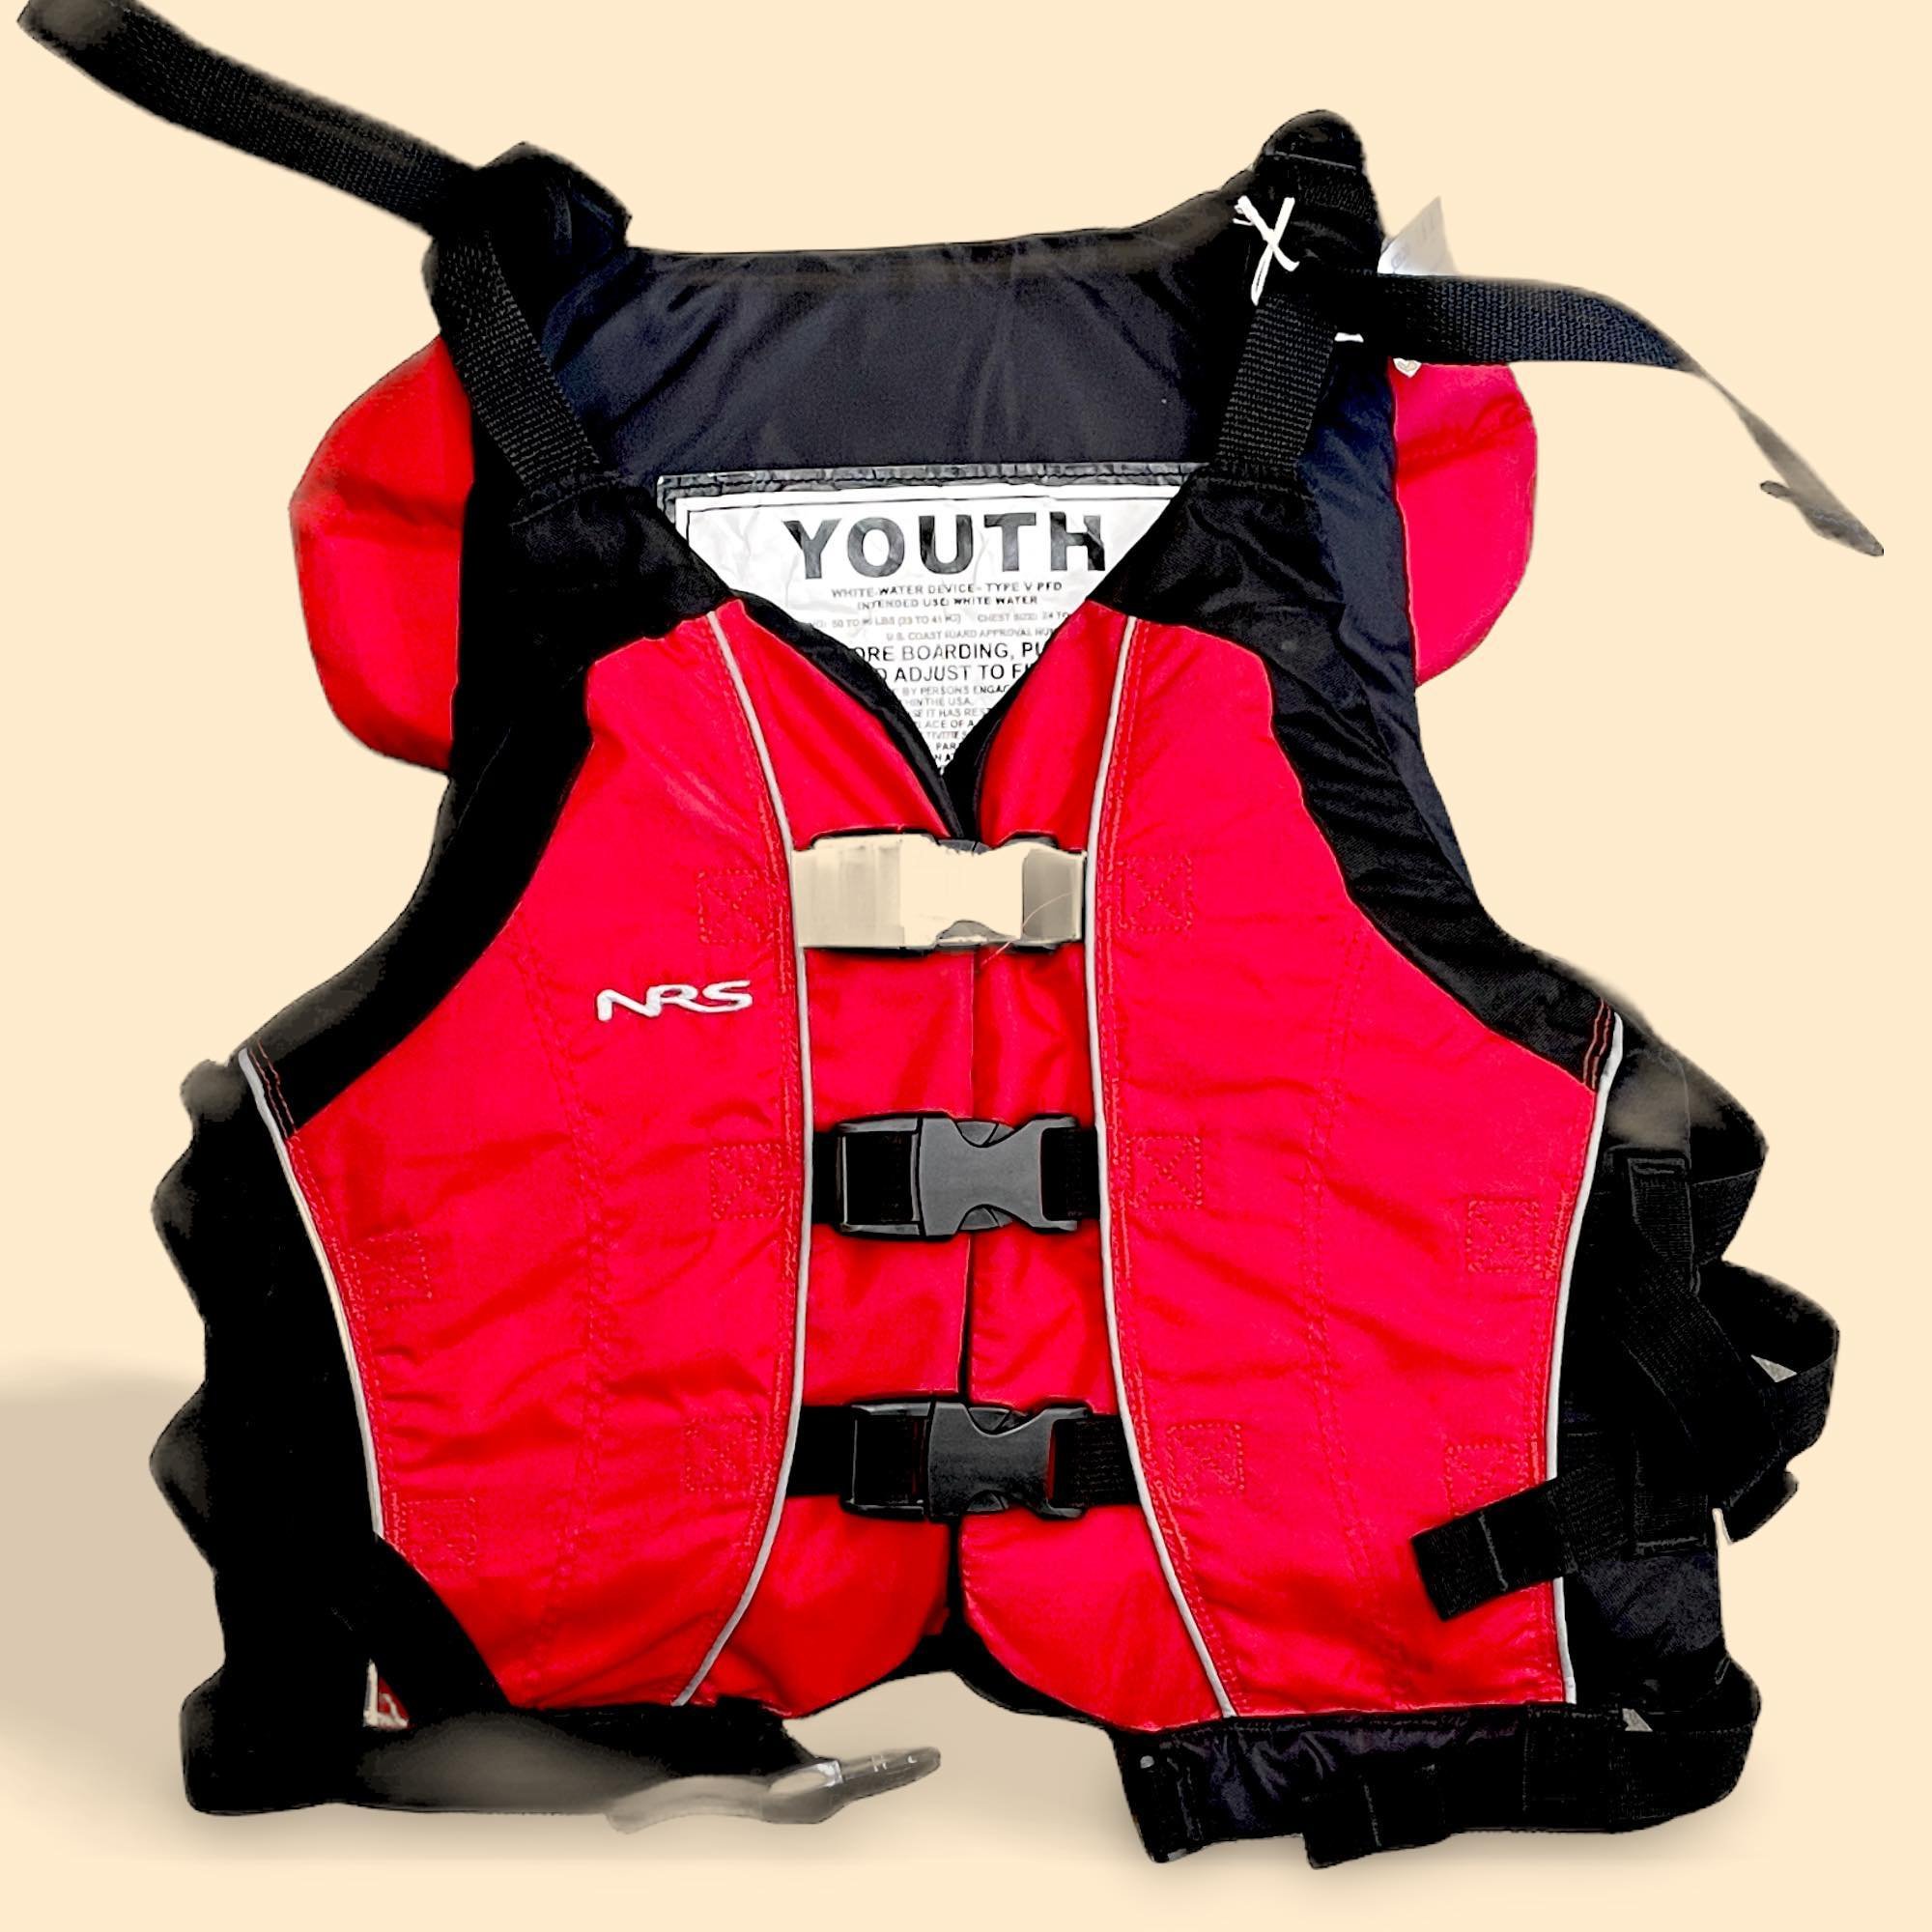 NRS Youth Big Water V PFD

Rated for whitewater! We have two, red and yellow. For youth 50-90 pounds.

MSRP: $117 // CC: $39